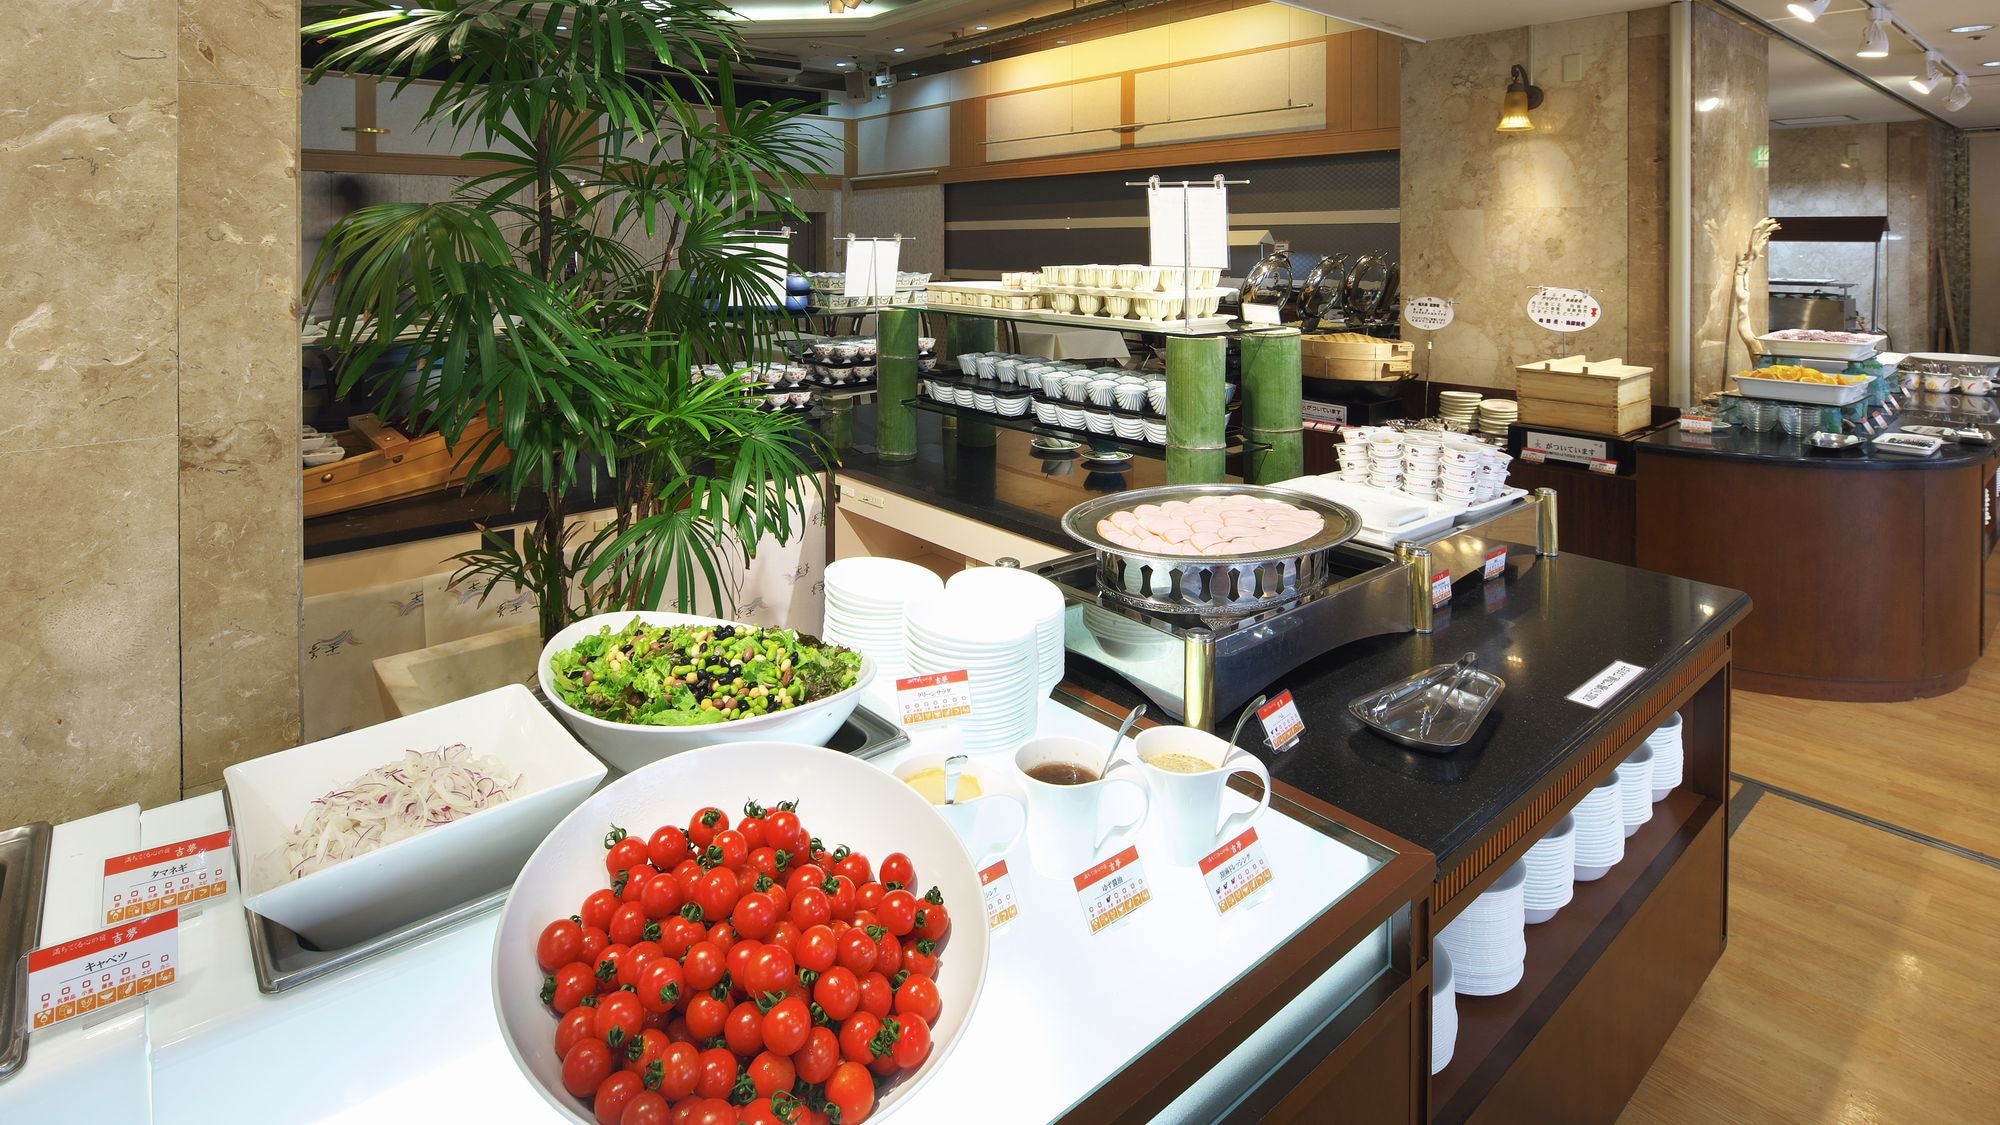 [Breakfast buffet] Salad is also fulfilling! Start a wonderful day with a healthy breakfast